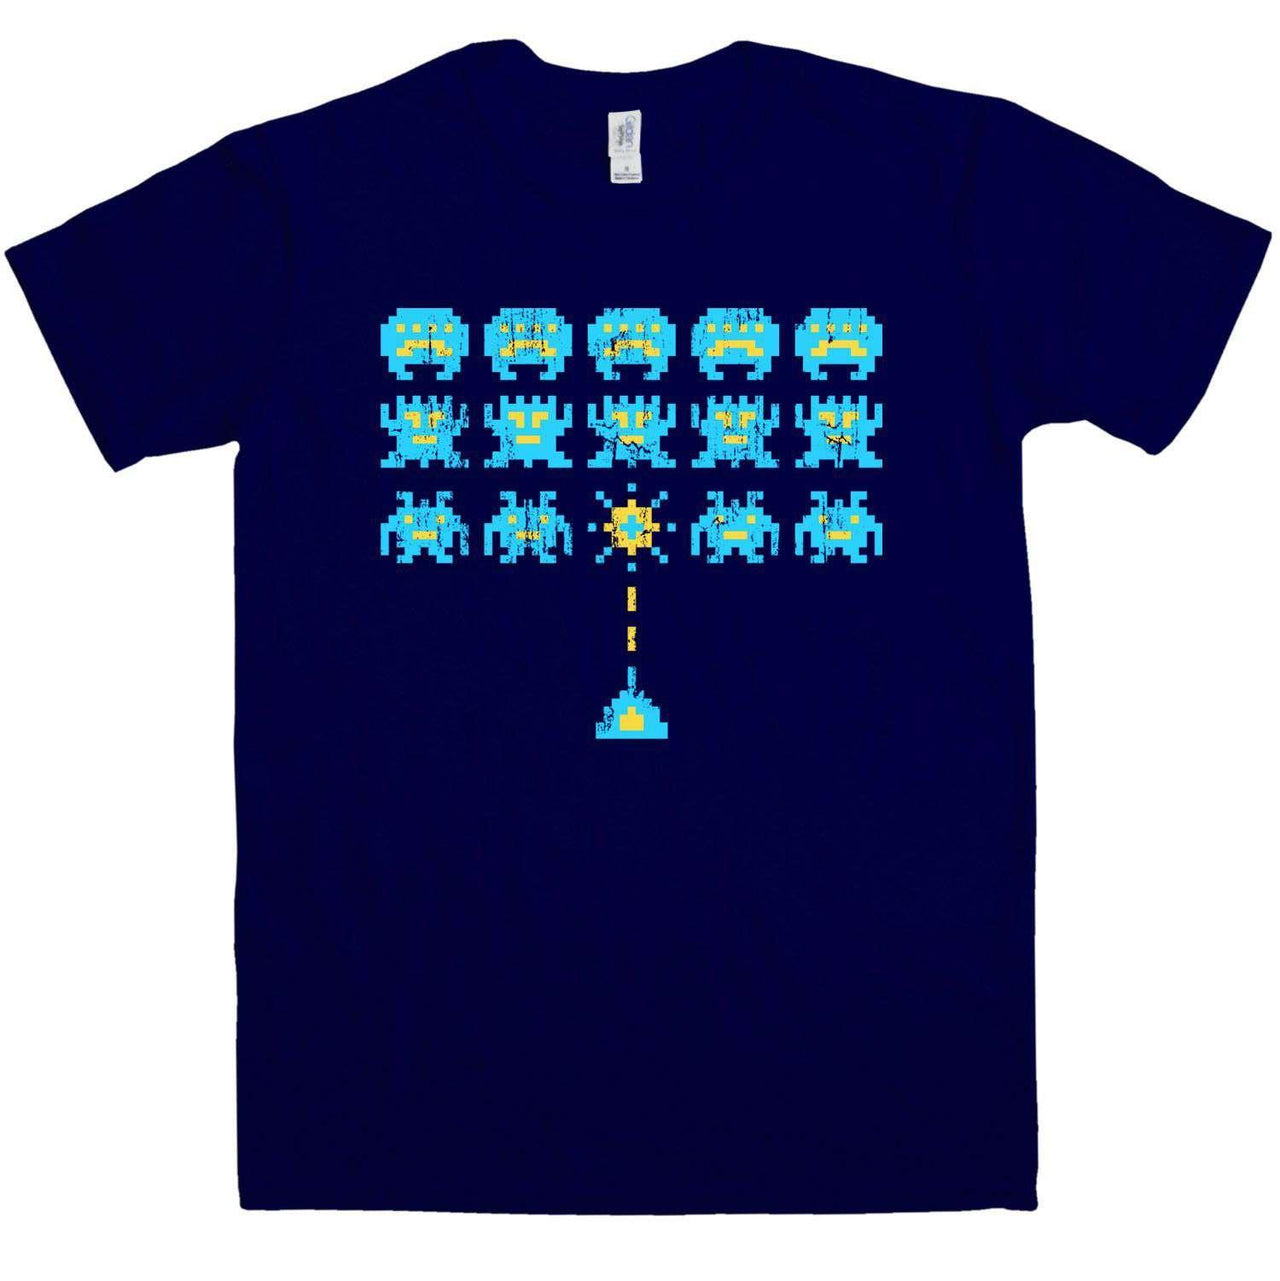 Invaders Graphic T-Shirt For Men 8Ball